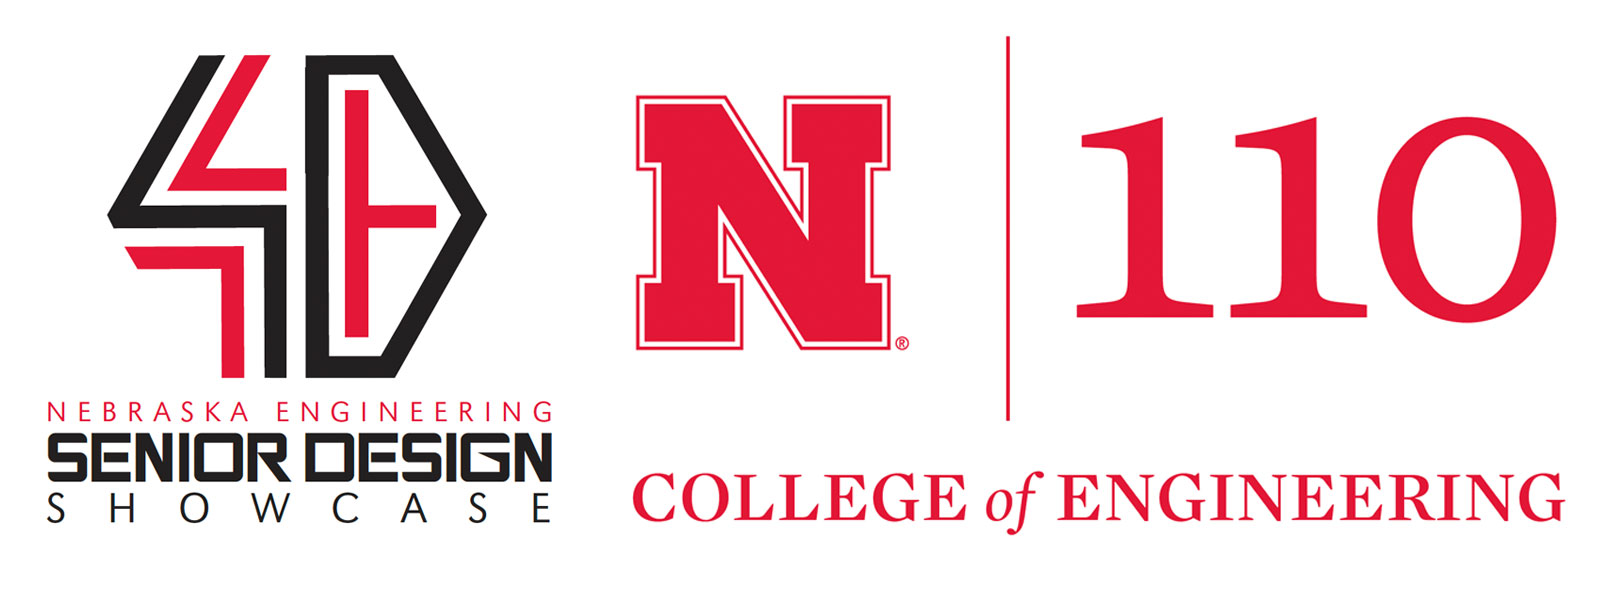 The 2019 Senior Design Showcase is April 26 at Memorial Stadium, followed by a reception honoring graduating seniors and the College of Engineering's 110th anniversary.